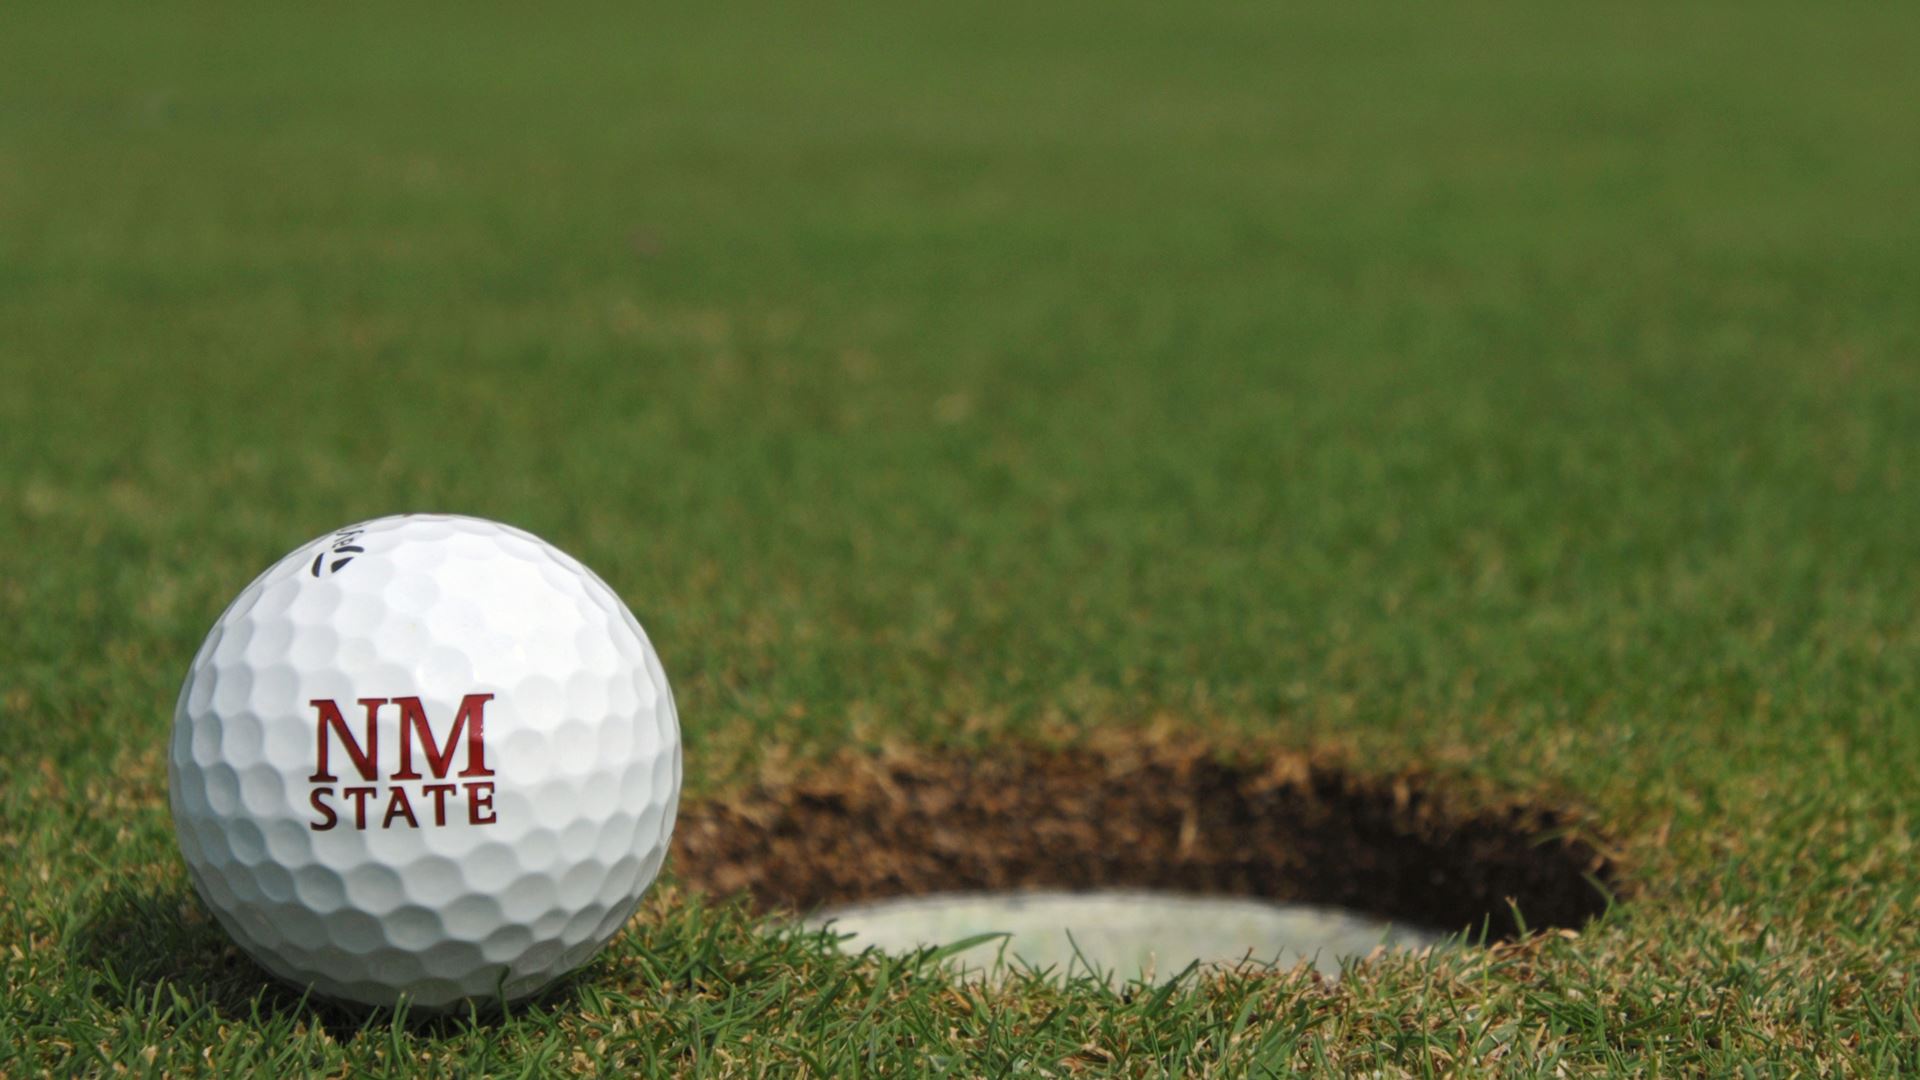 NMSU Golf Course recognized among top college courses, top courses in state